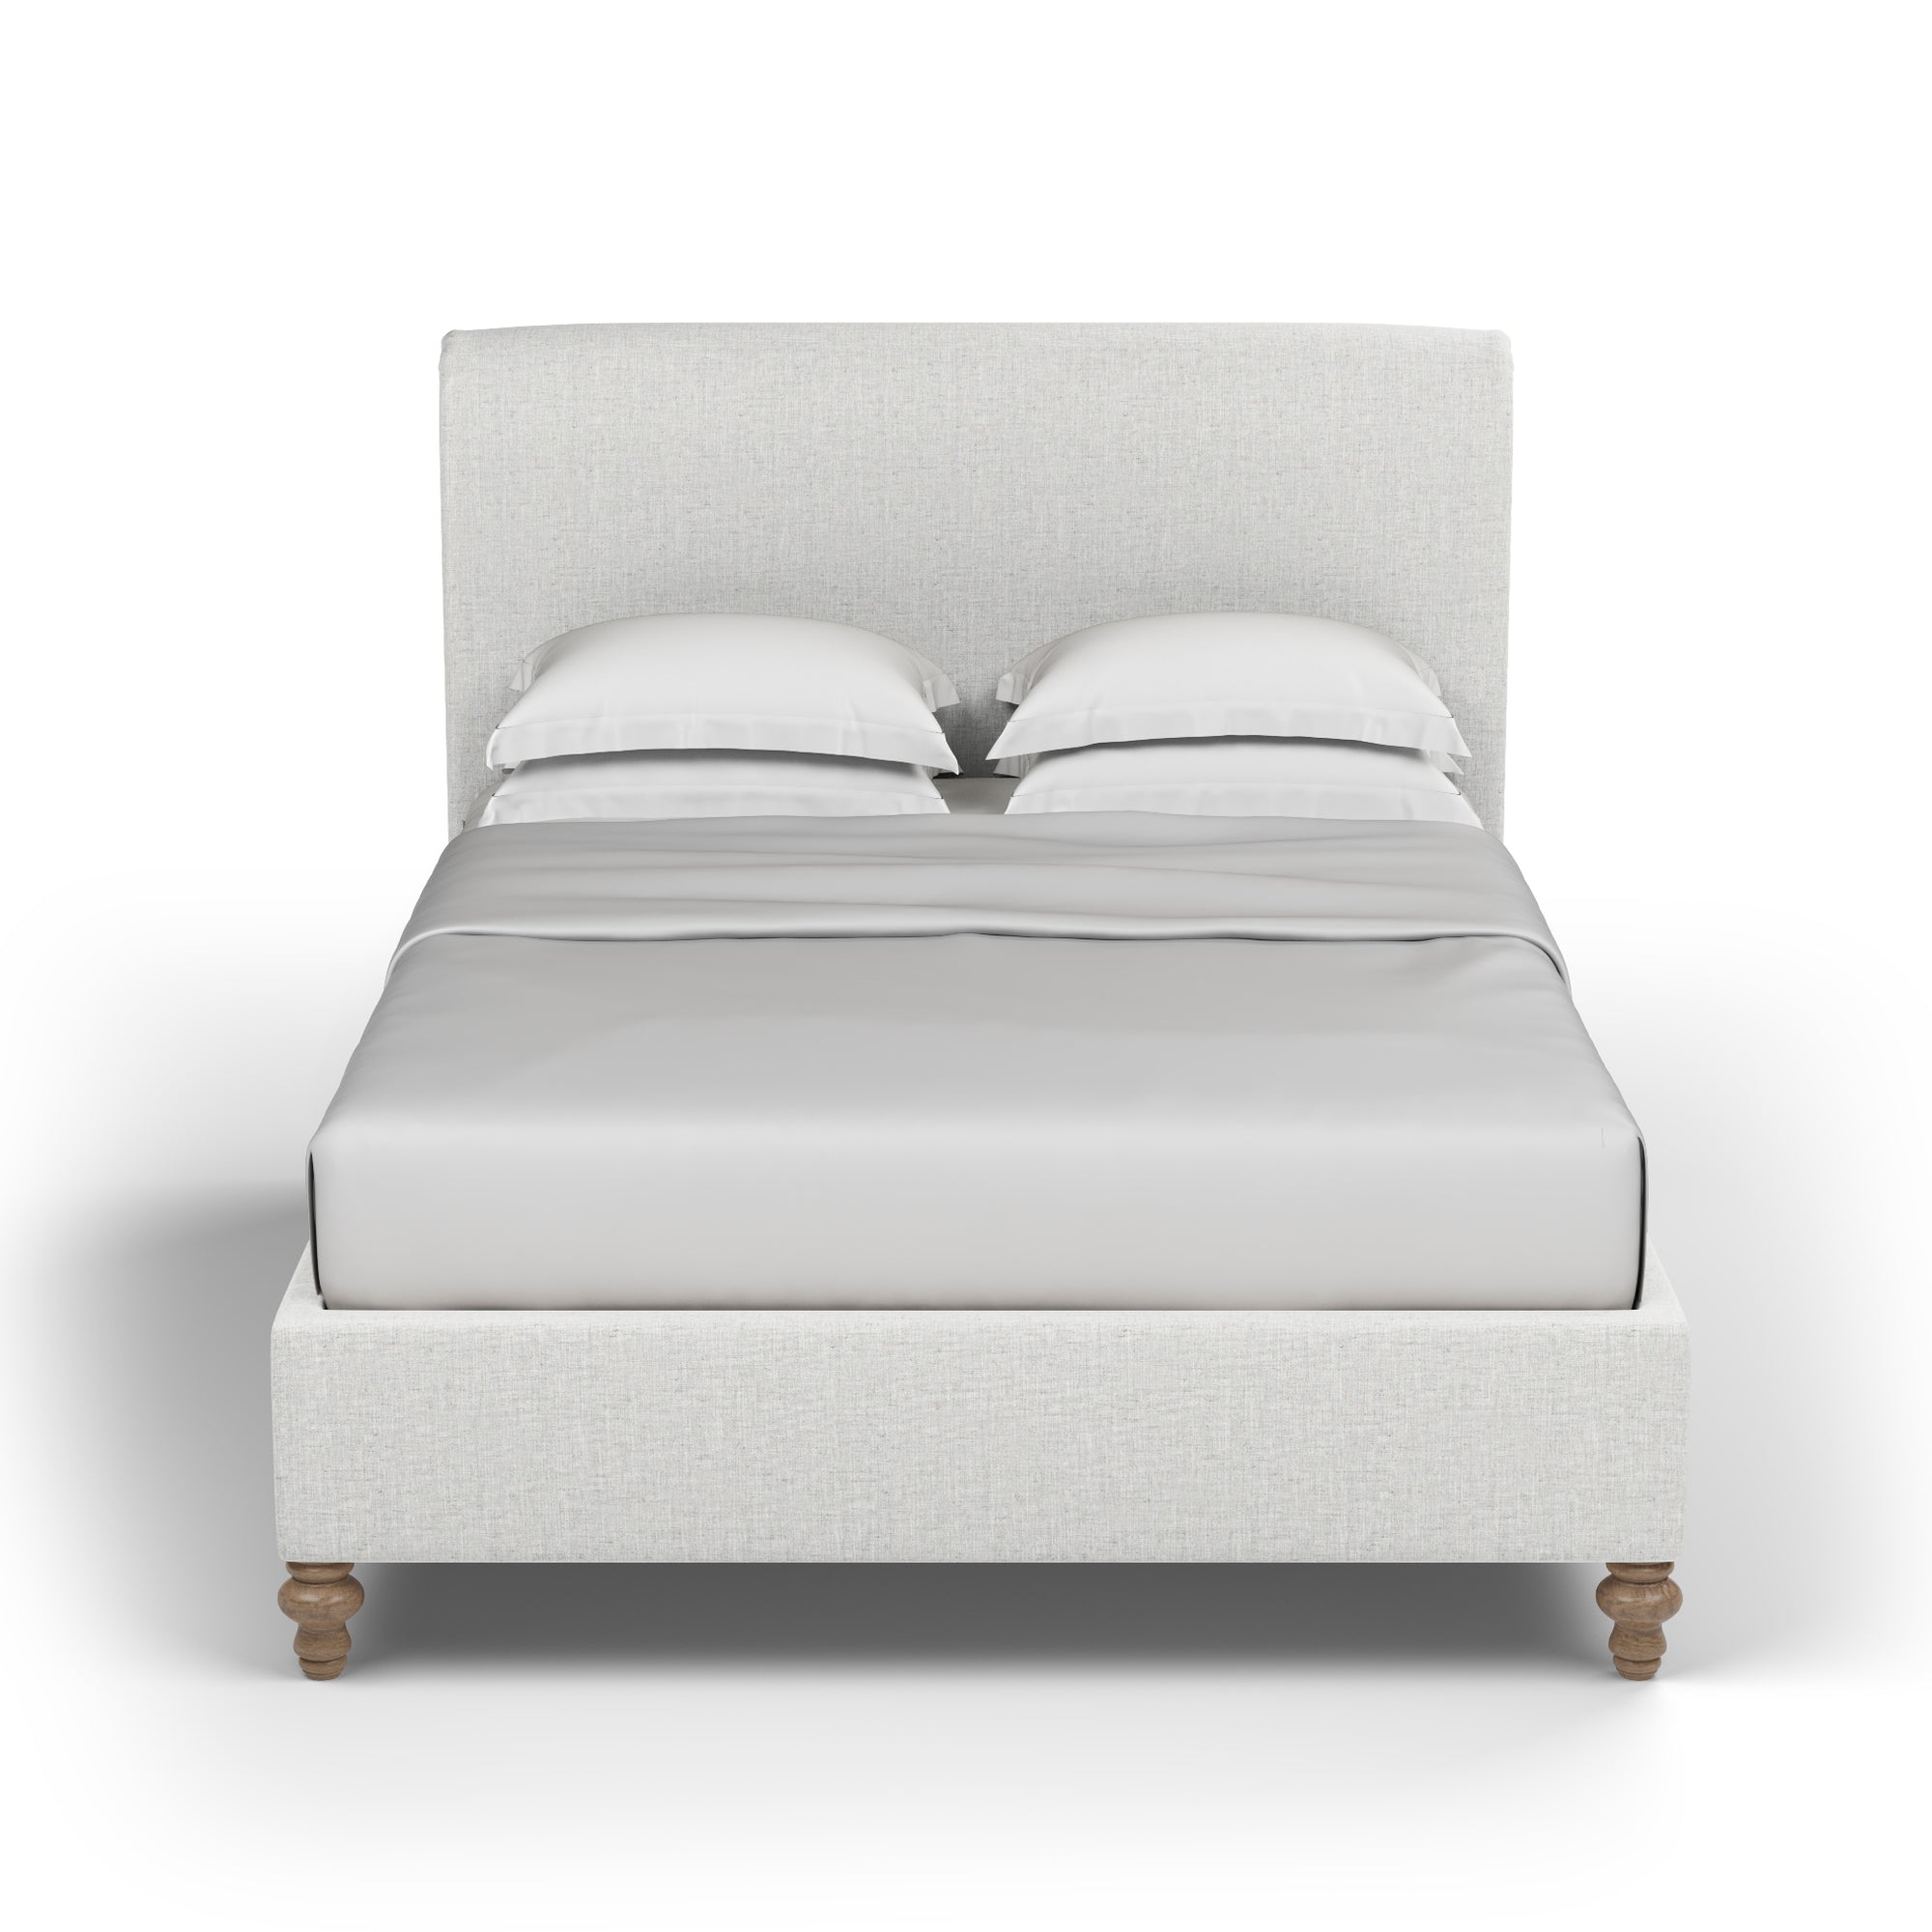 Empire Scroll Bed - Blanc Box Weave Linen